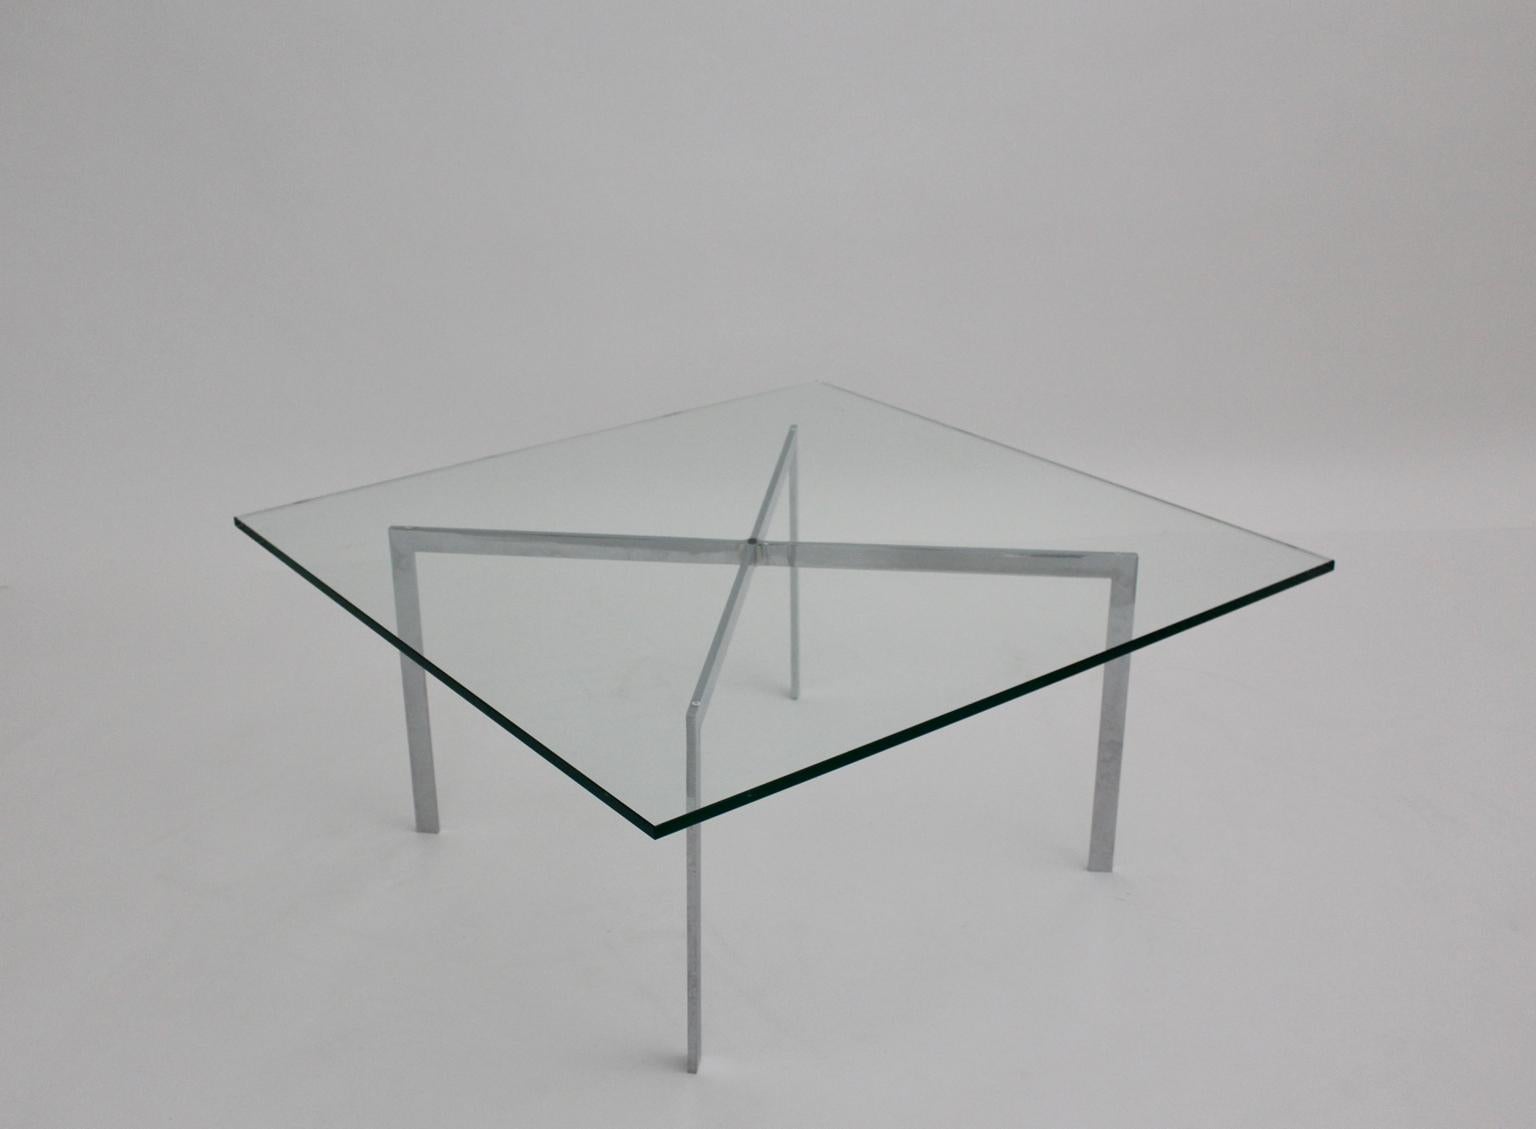 Late 20th Century Bauhaus Vintage Chrome Glass Coffee Table Barcelona by Mies van der Rohe, 1929 For Sale